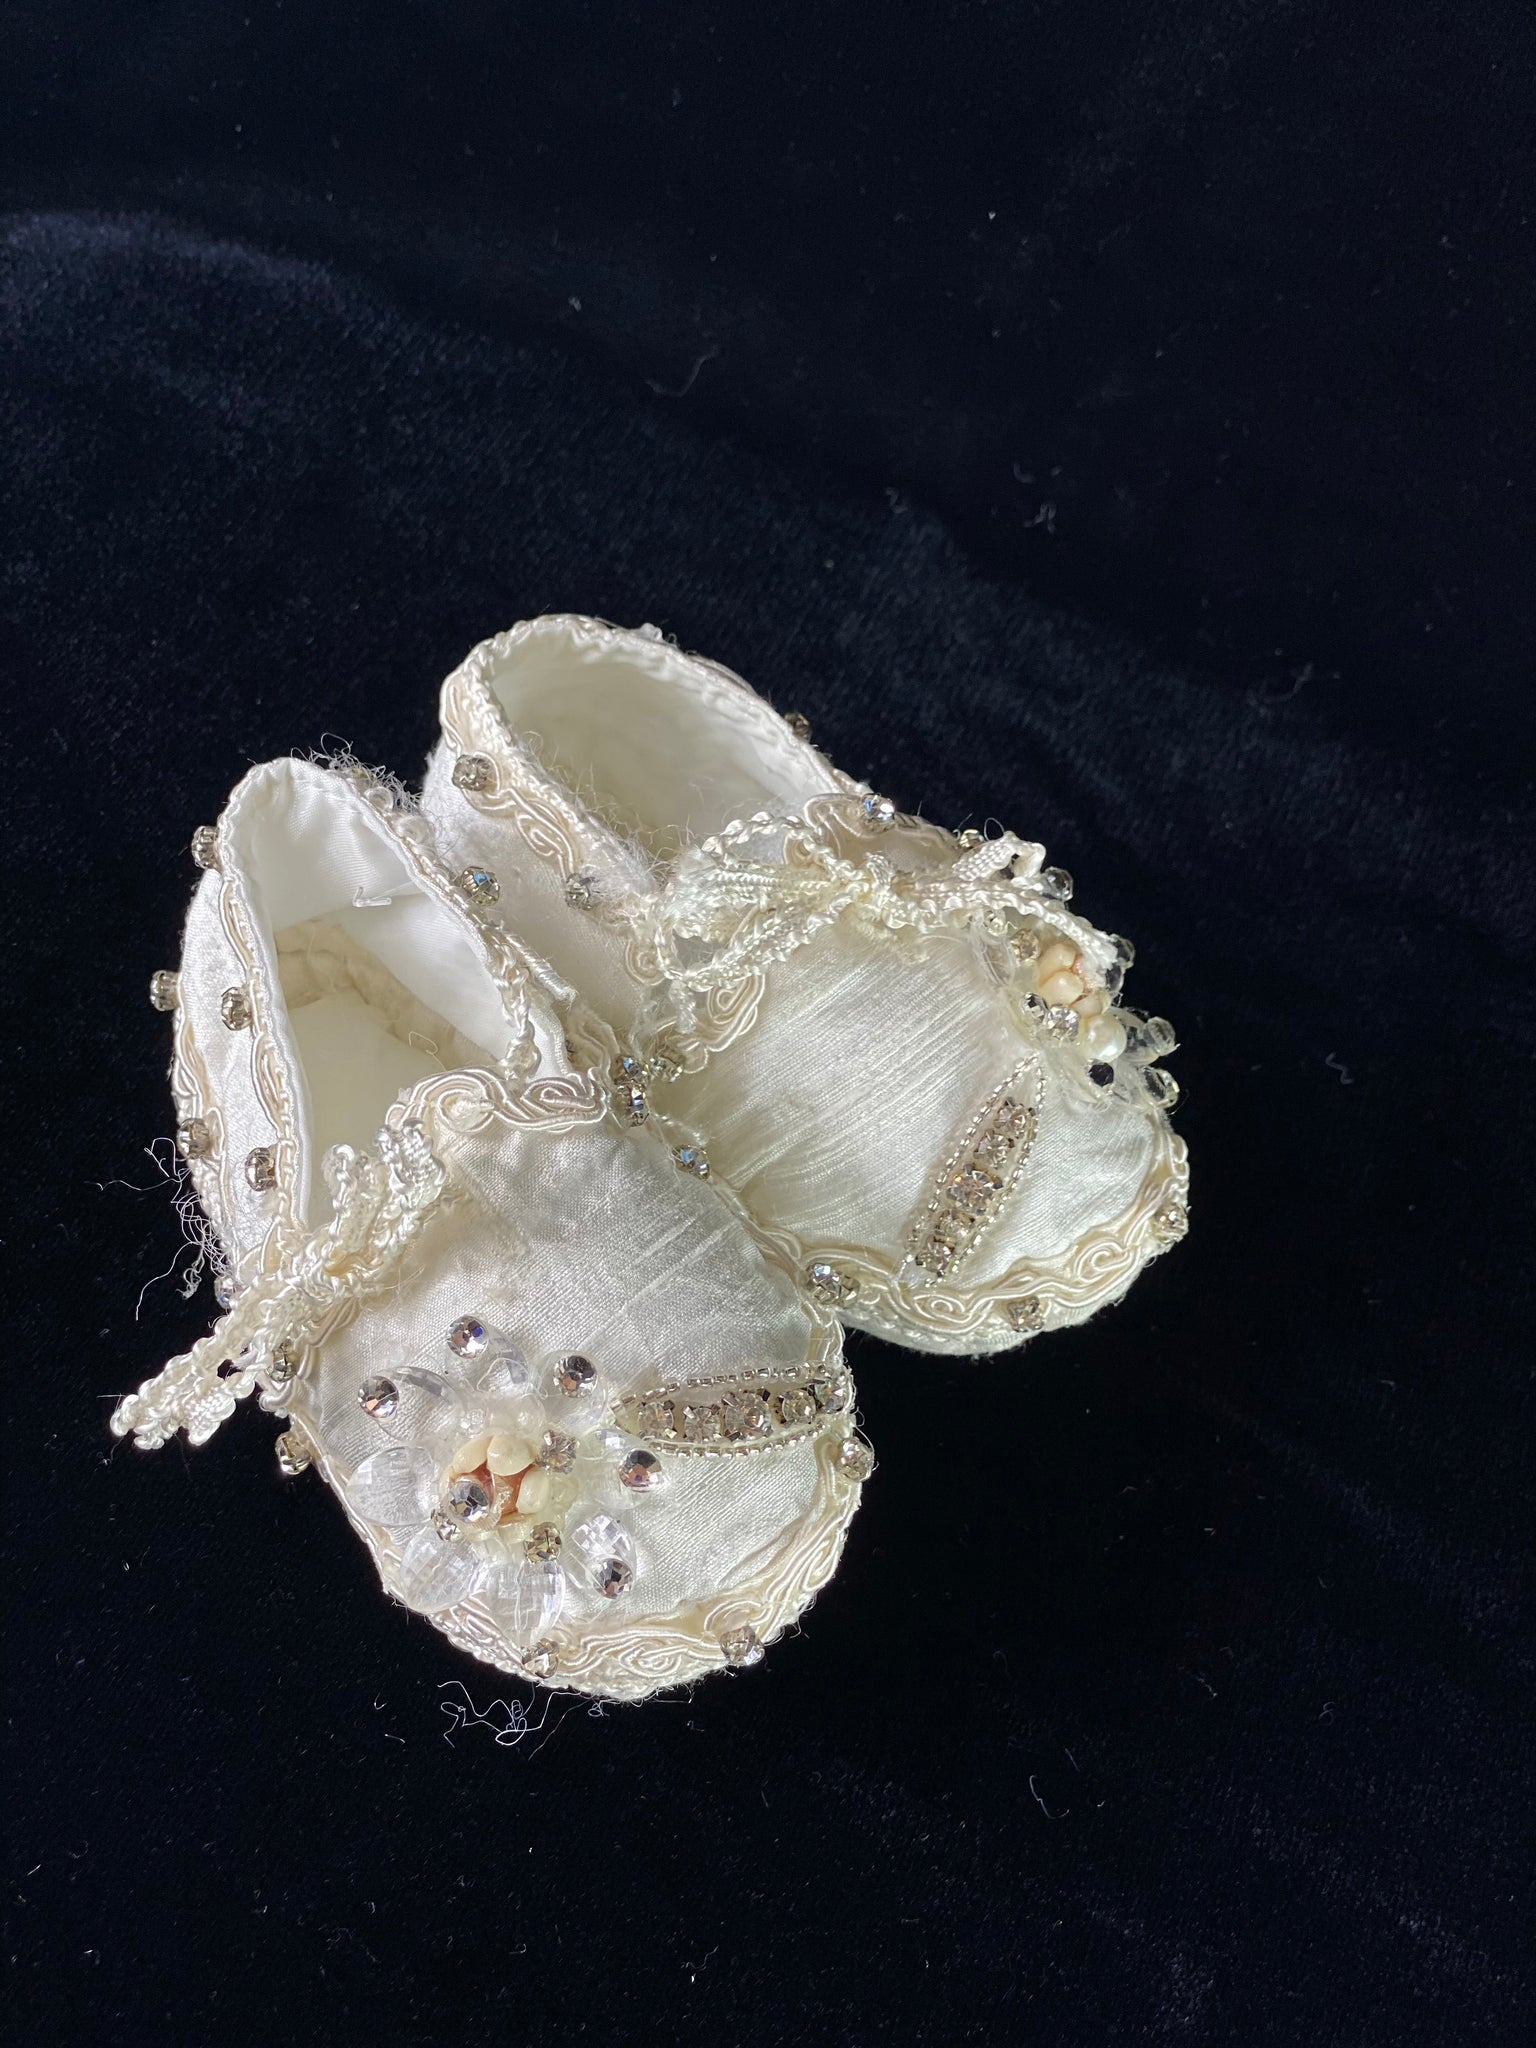 Elegant handmade ivory baby girl shoes with embroidery, lace, flowers, and jewels (crystals).